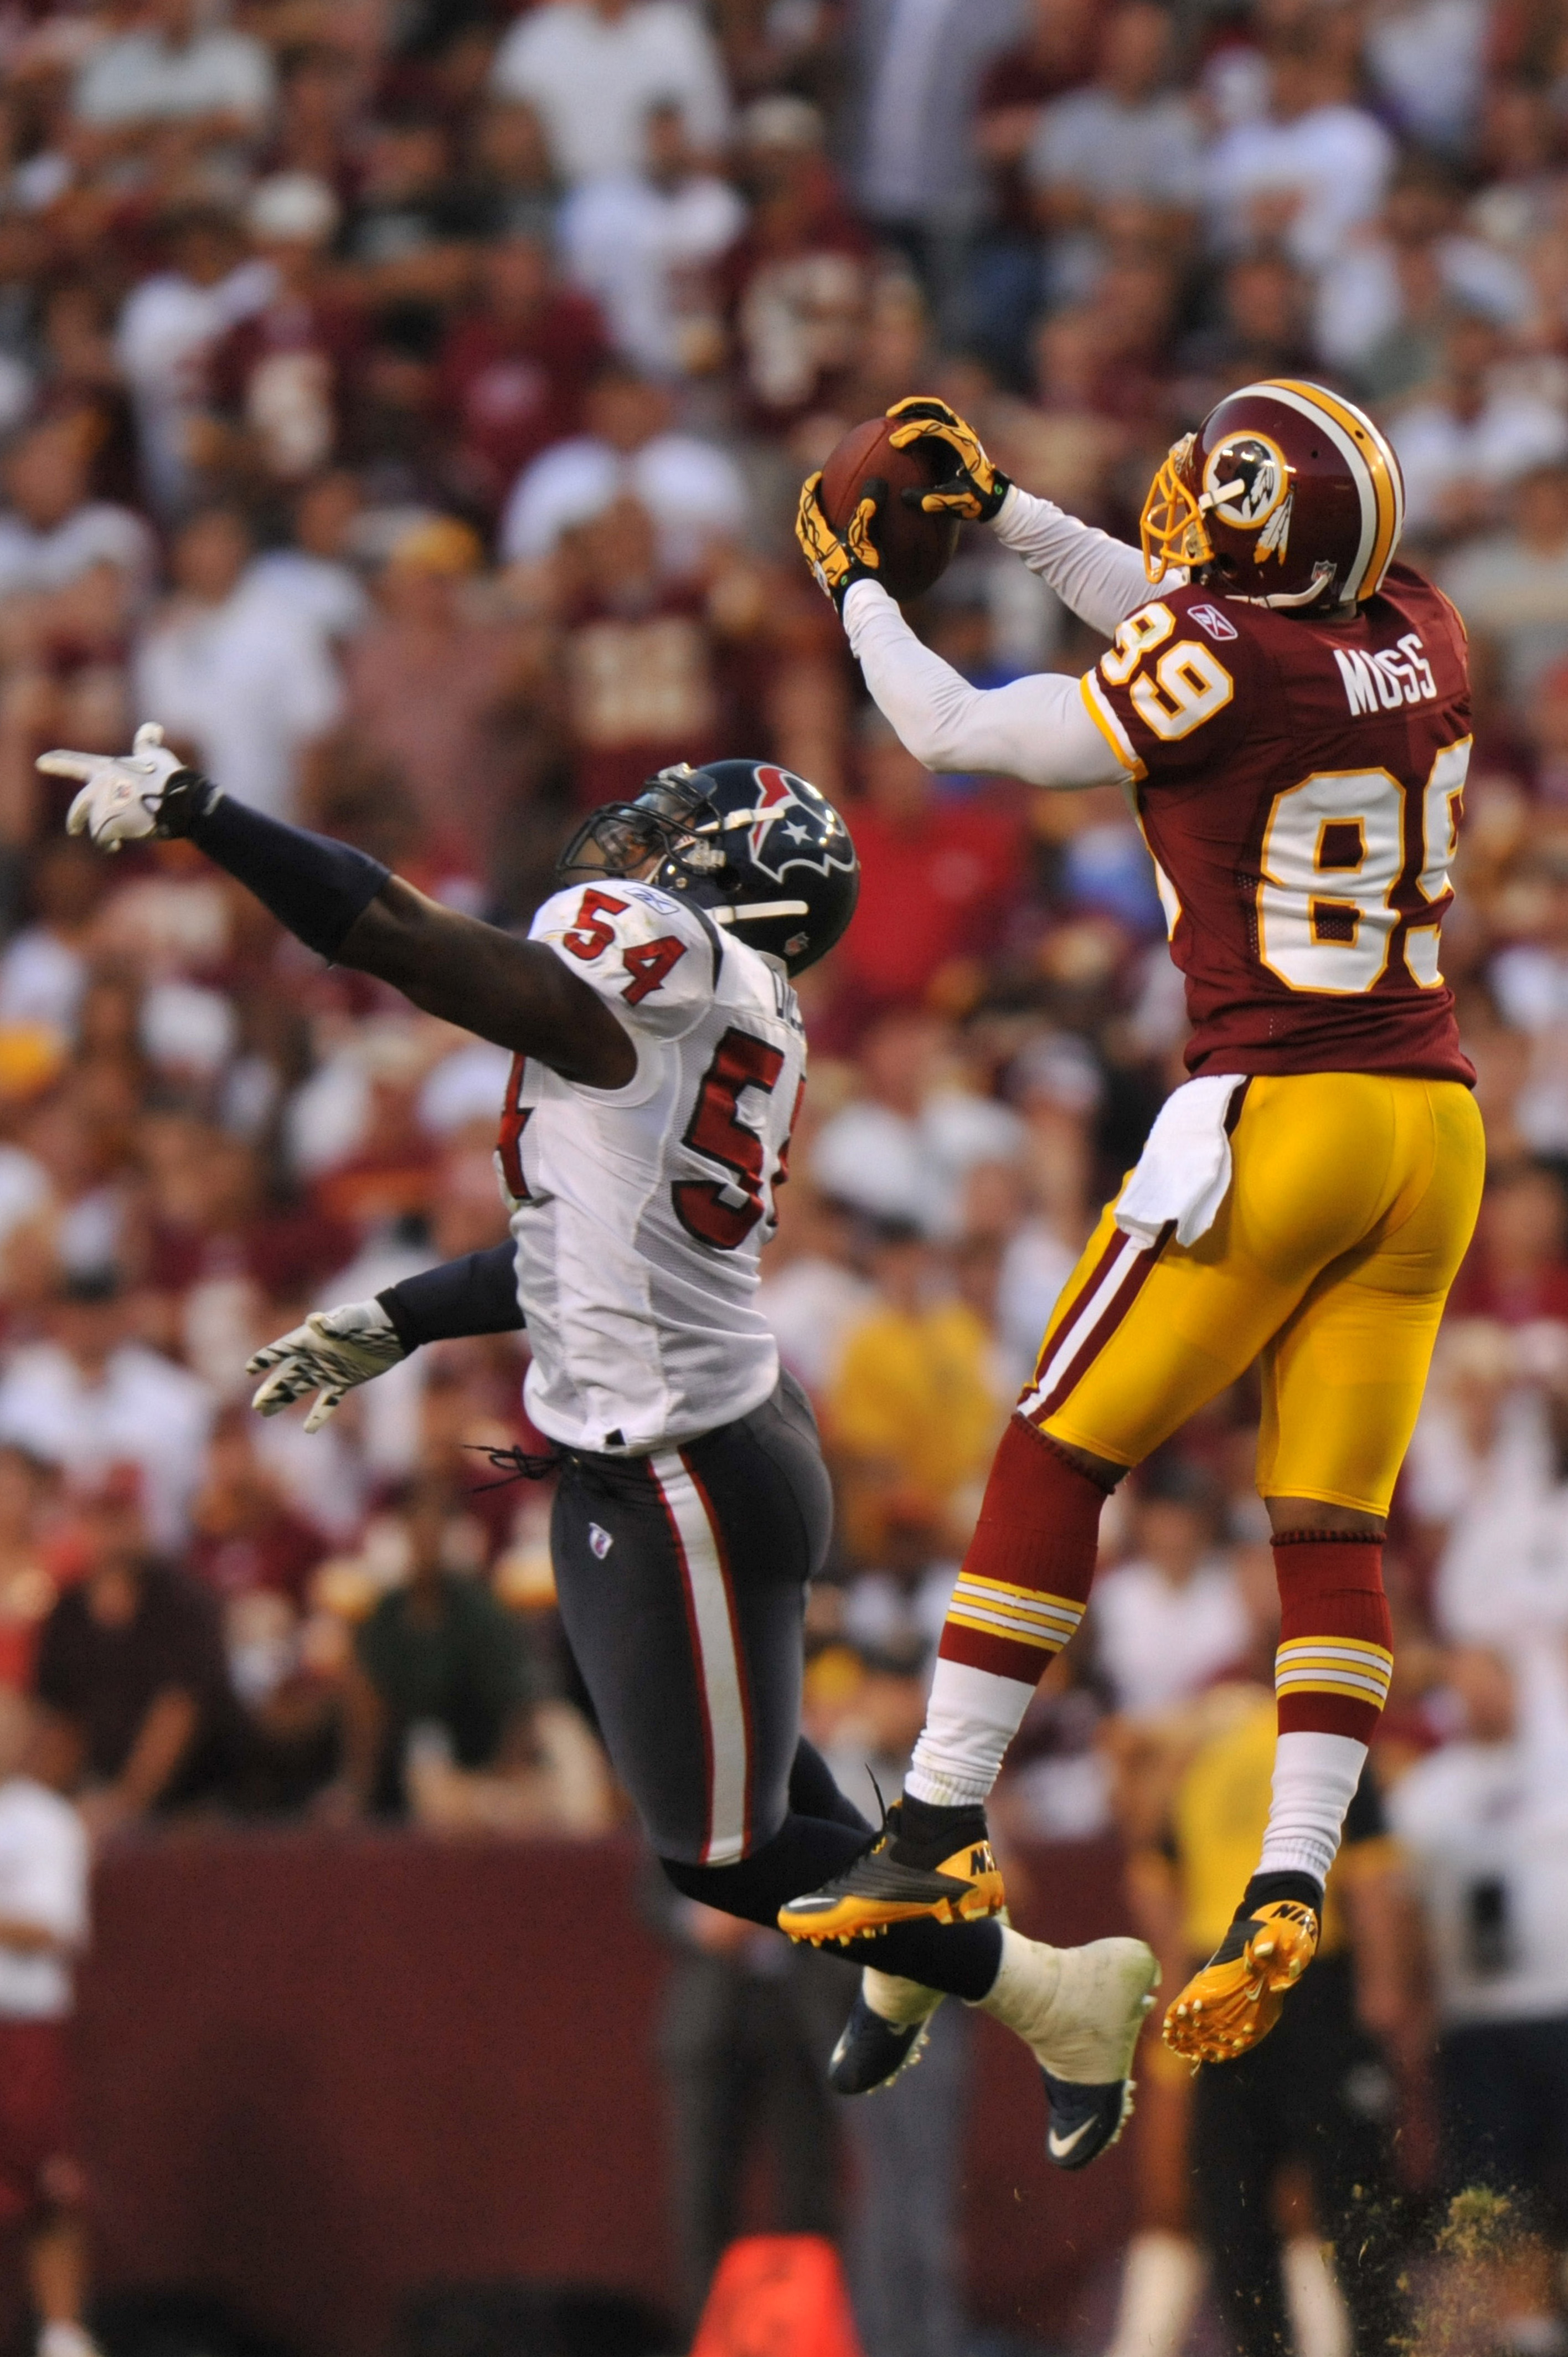 LANDOVER, MD - SEPTEMBER 19:  Santana Moss #89 of the Washington Redskins makes a catch against the Houston Texans at FedExField on September 19, 2010 in Landover, Maryland. The Texans defeated the Redskins in overtime 30-27. (Photo by Larry French/Getty